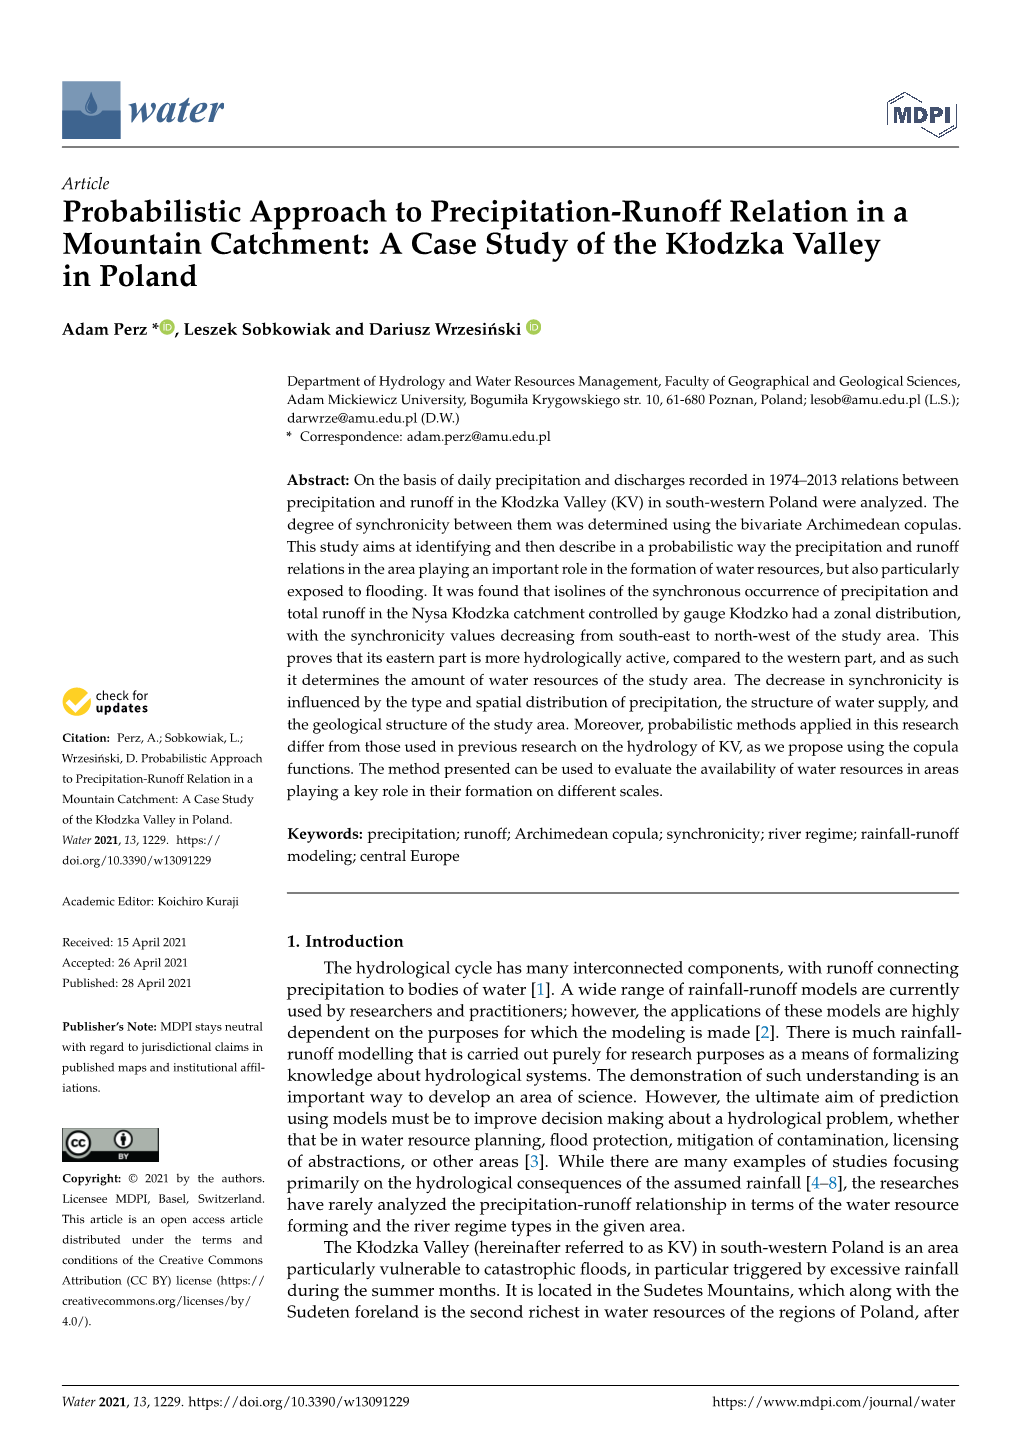 Probabilistic Approach to Precipitation-Runoff Relation in a Mountain Catchment: a Case Study of the Kłodzka Valley in Poland